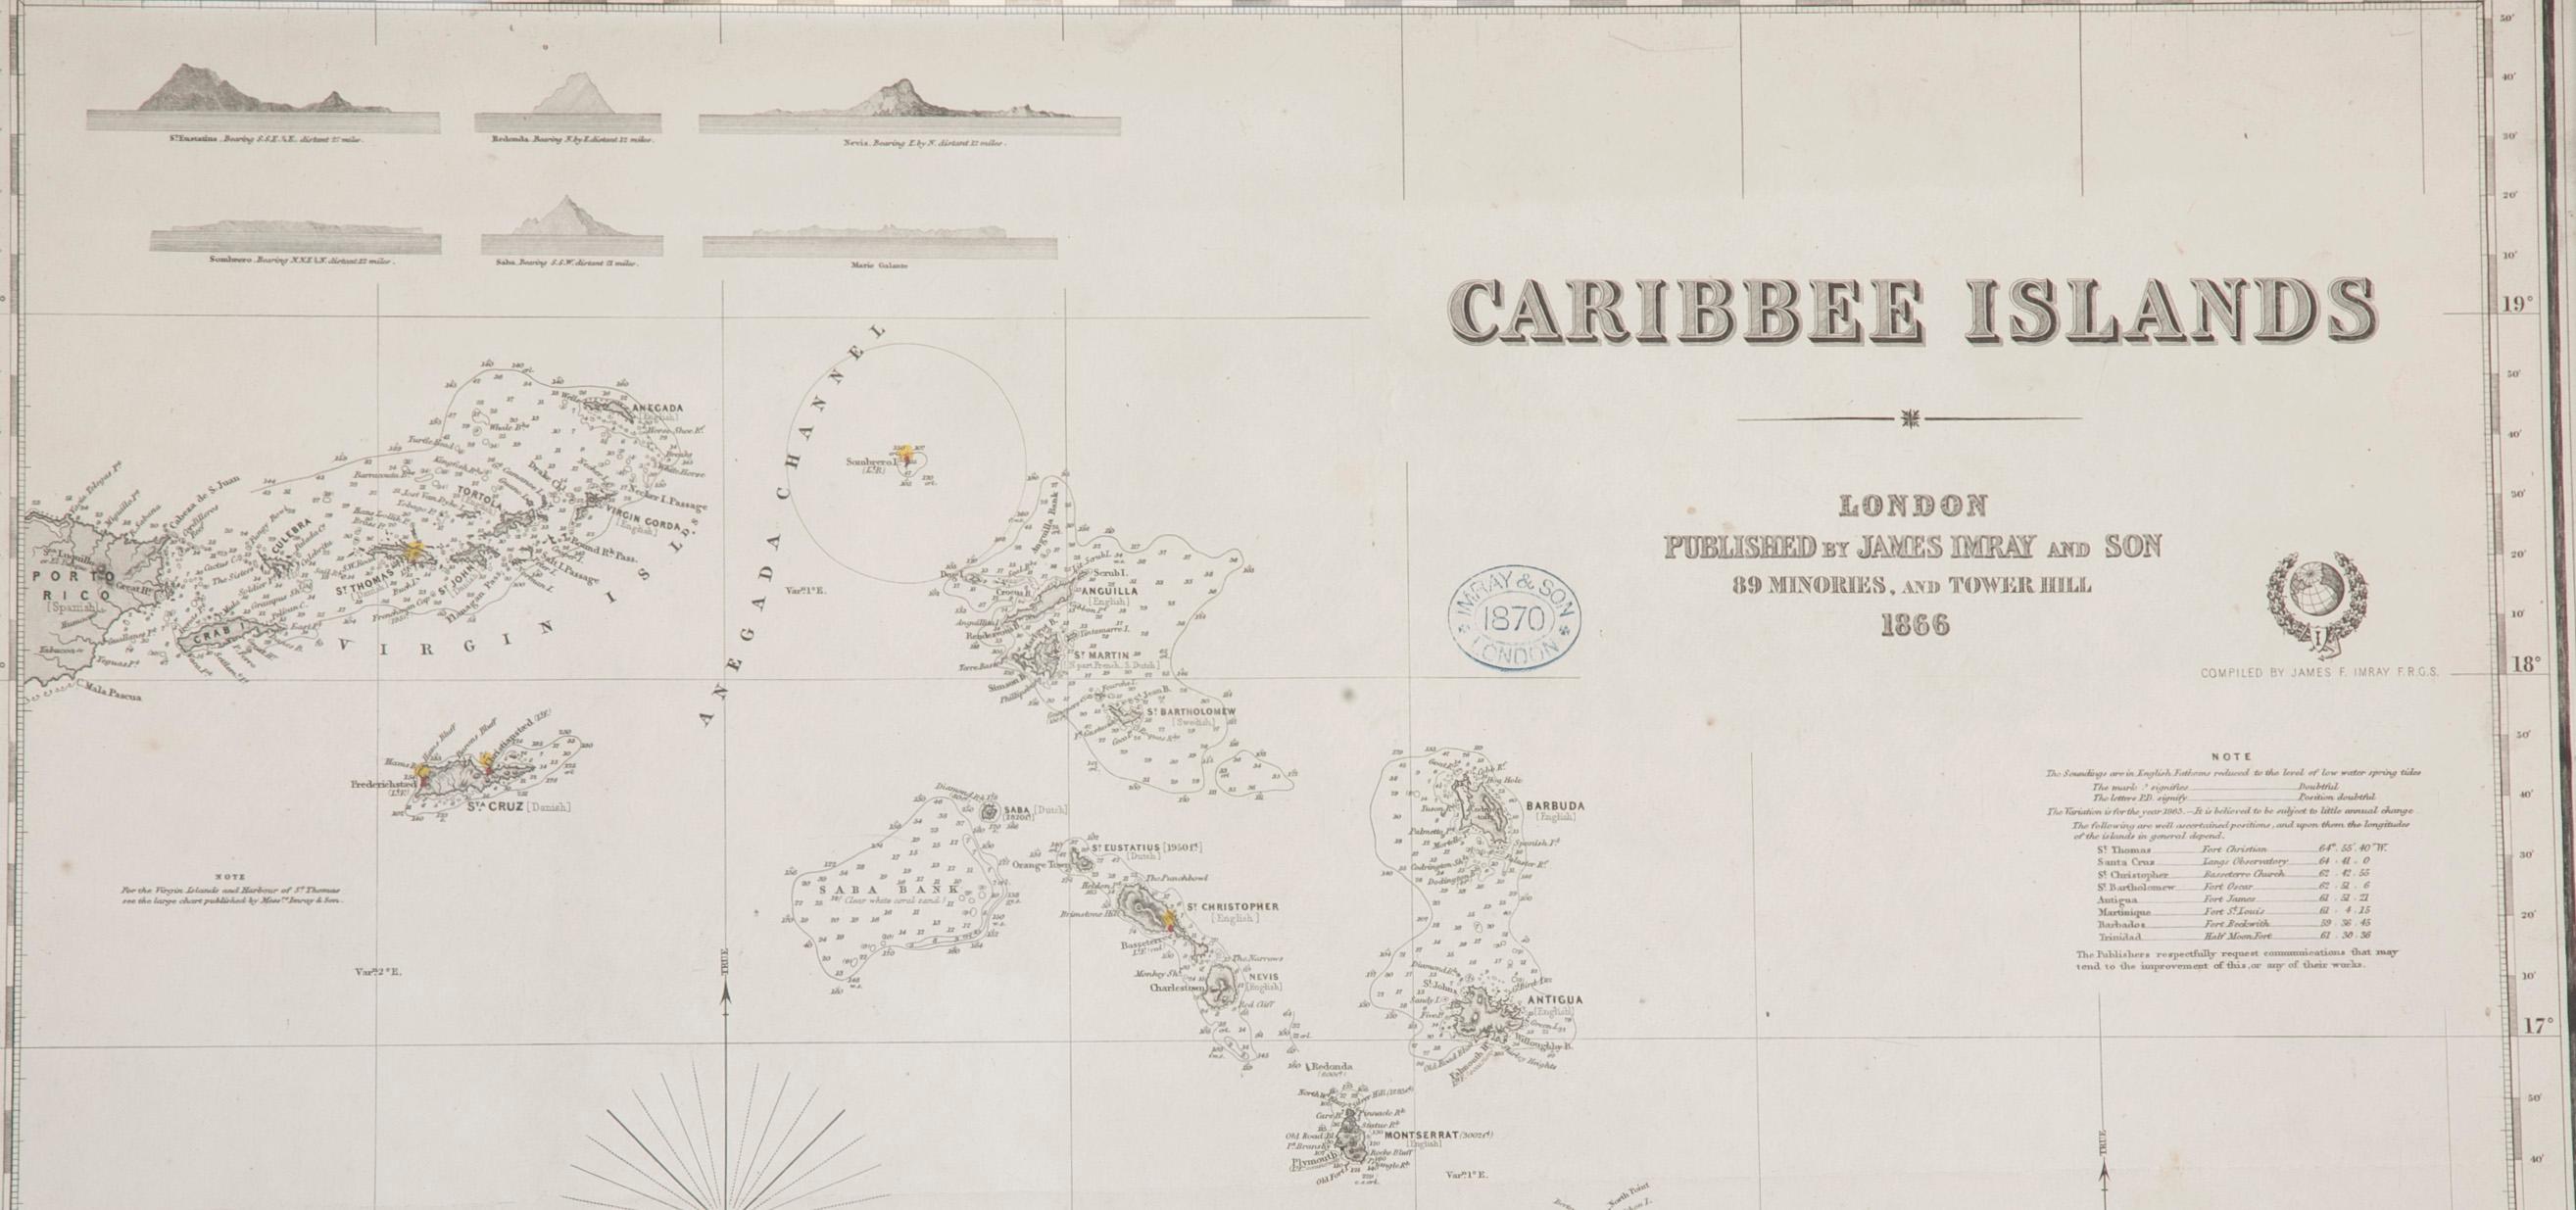 Folk Art Rare Chart of the Caribbean Islands Published by James Imray & Son, London, 1866